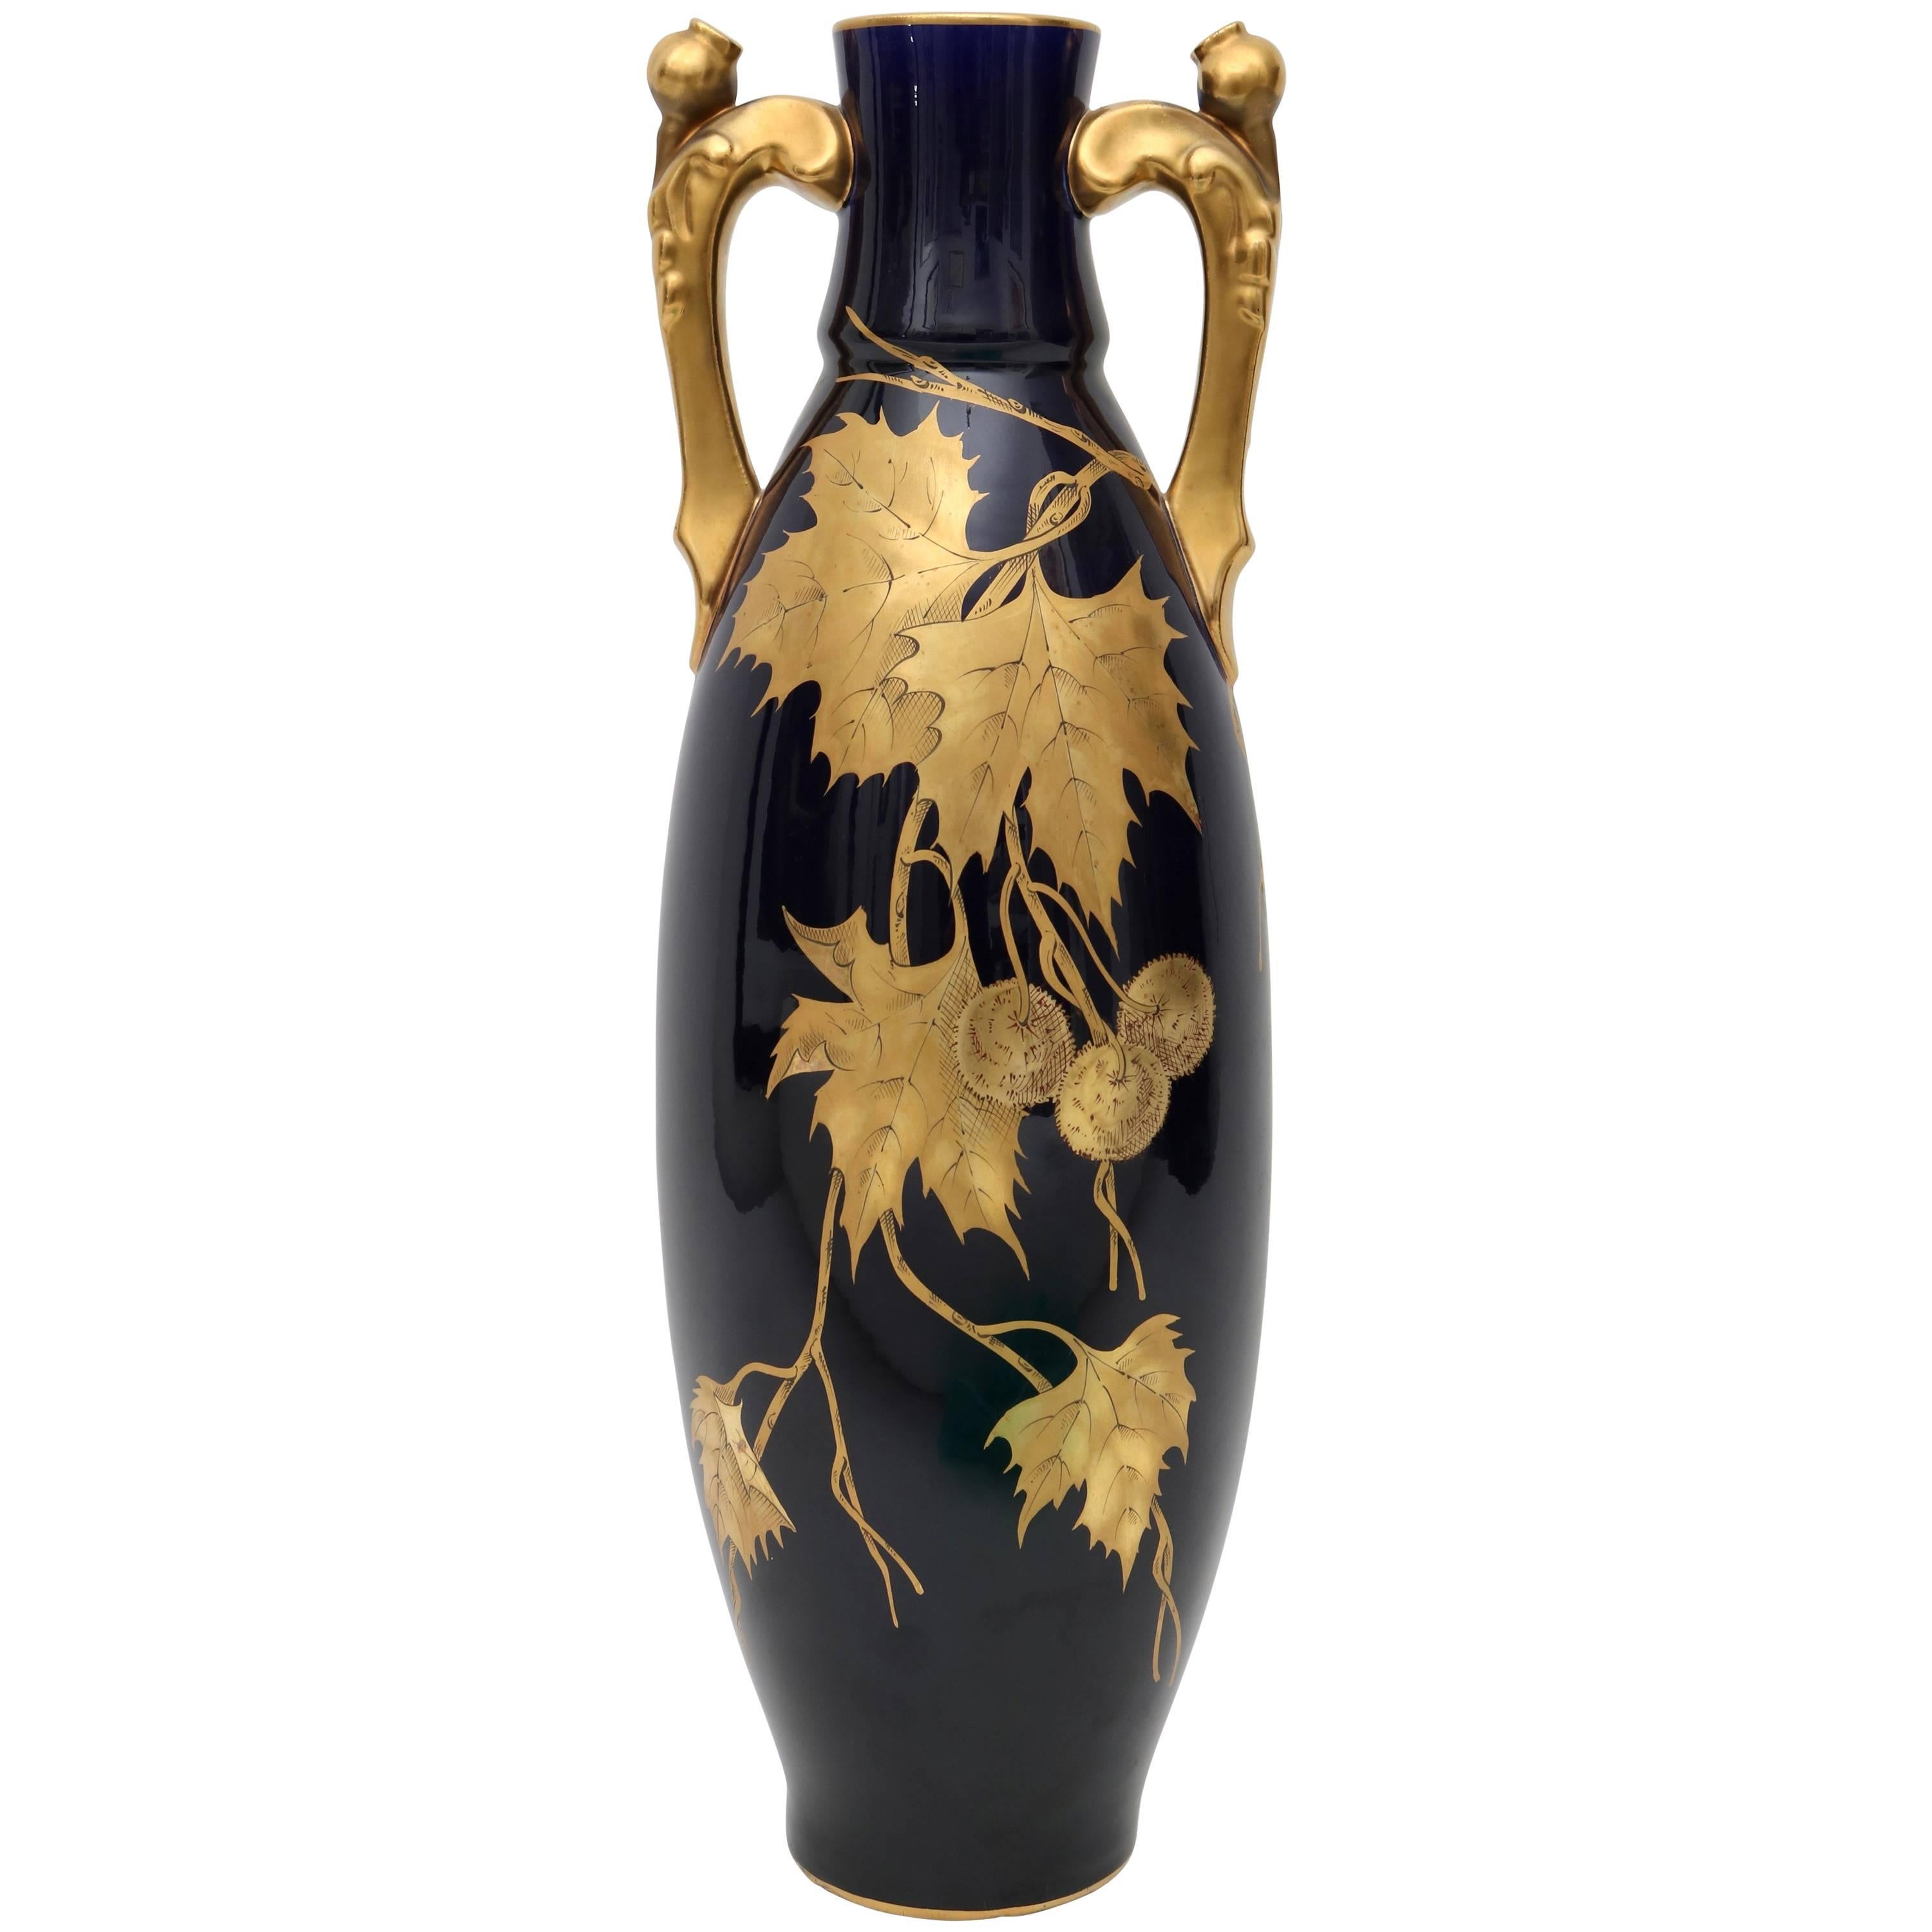 Porcelain Vase by Gustave Asch in Cobalt Blue and Gold, circa 1900